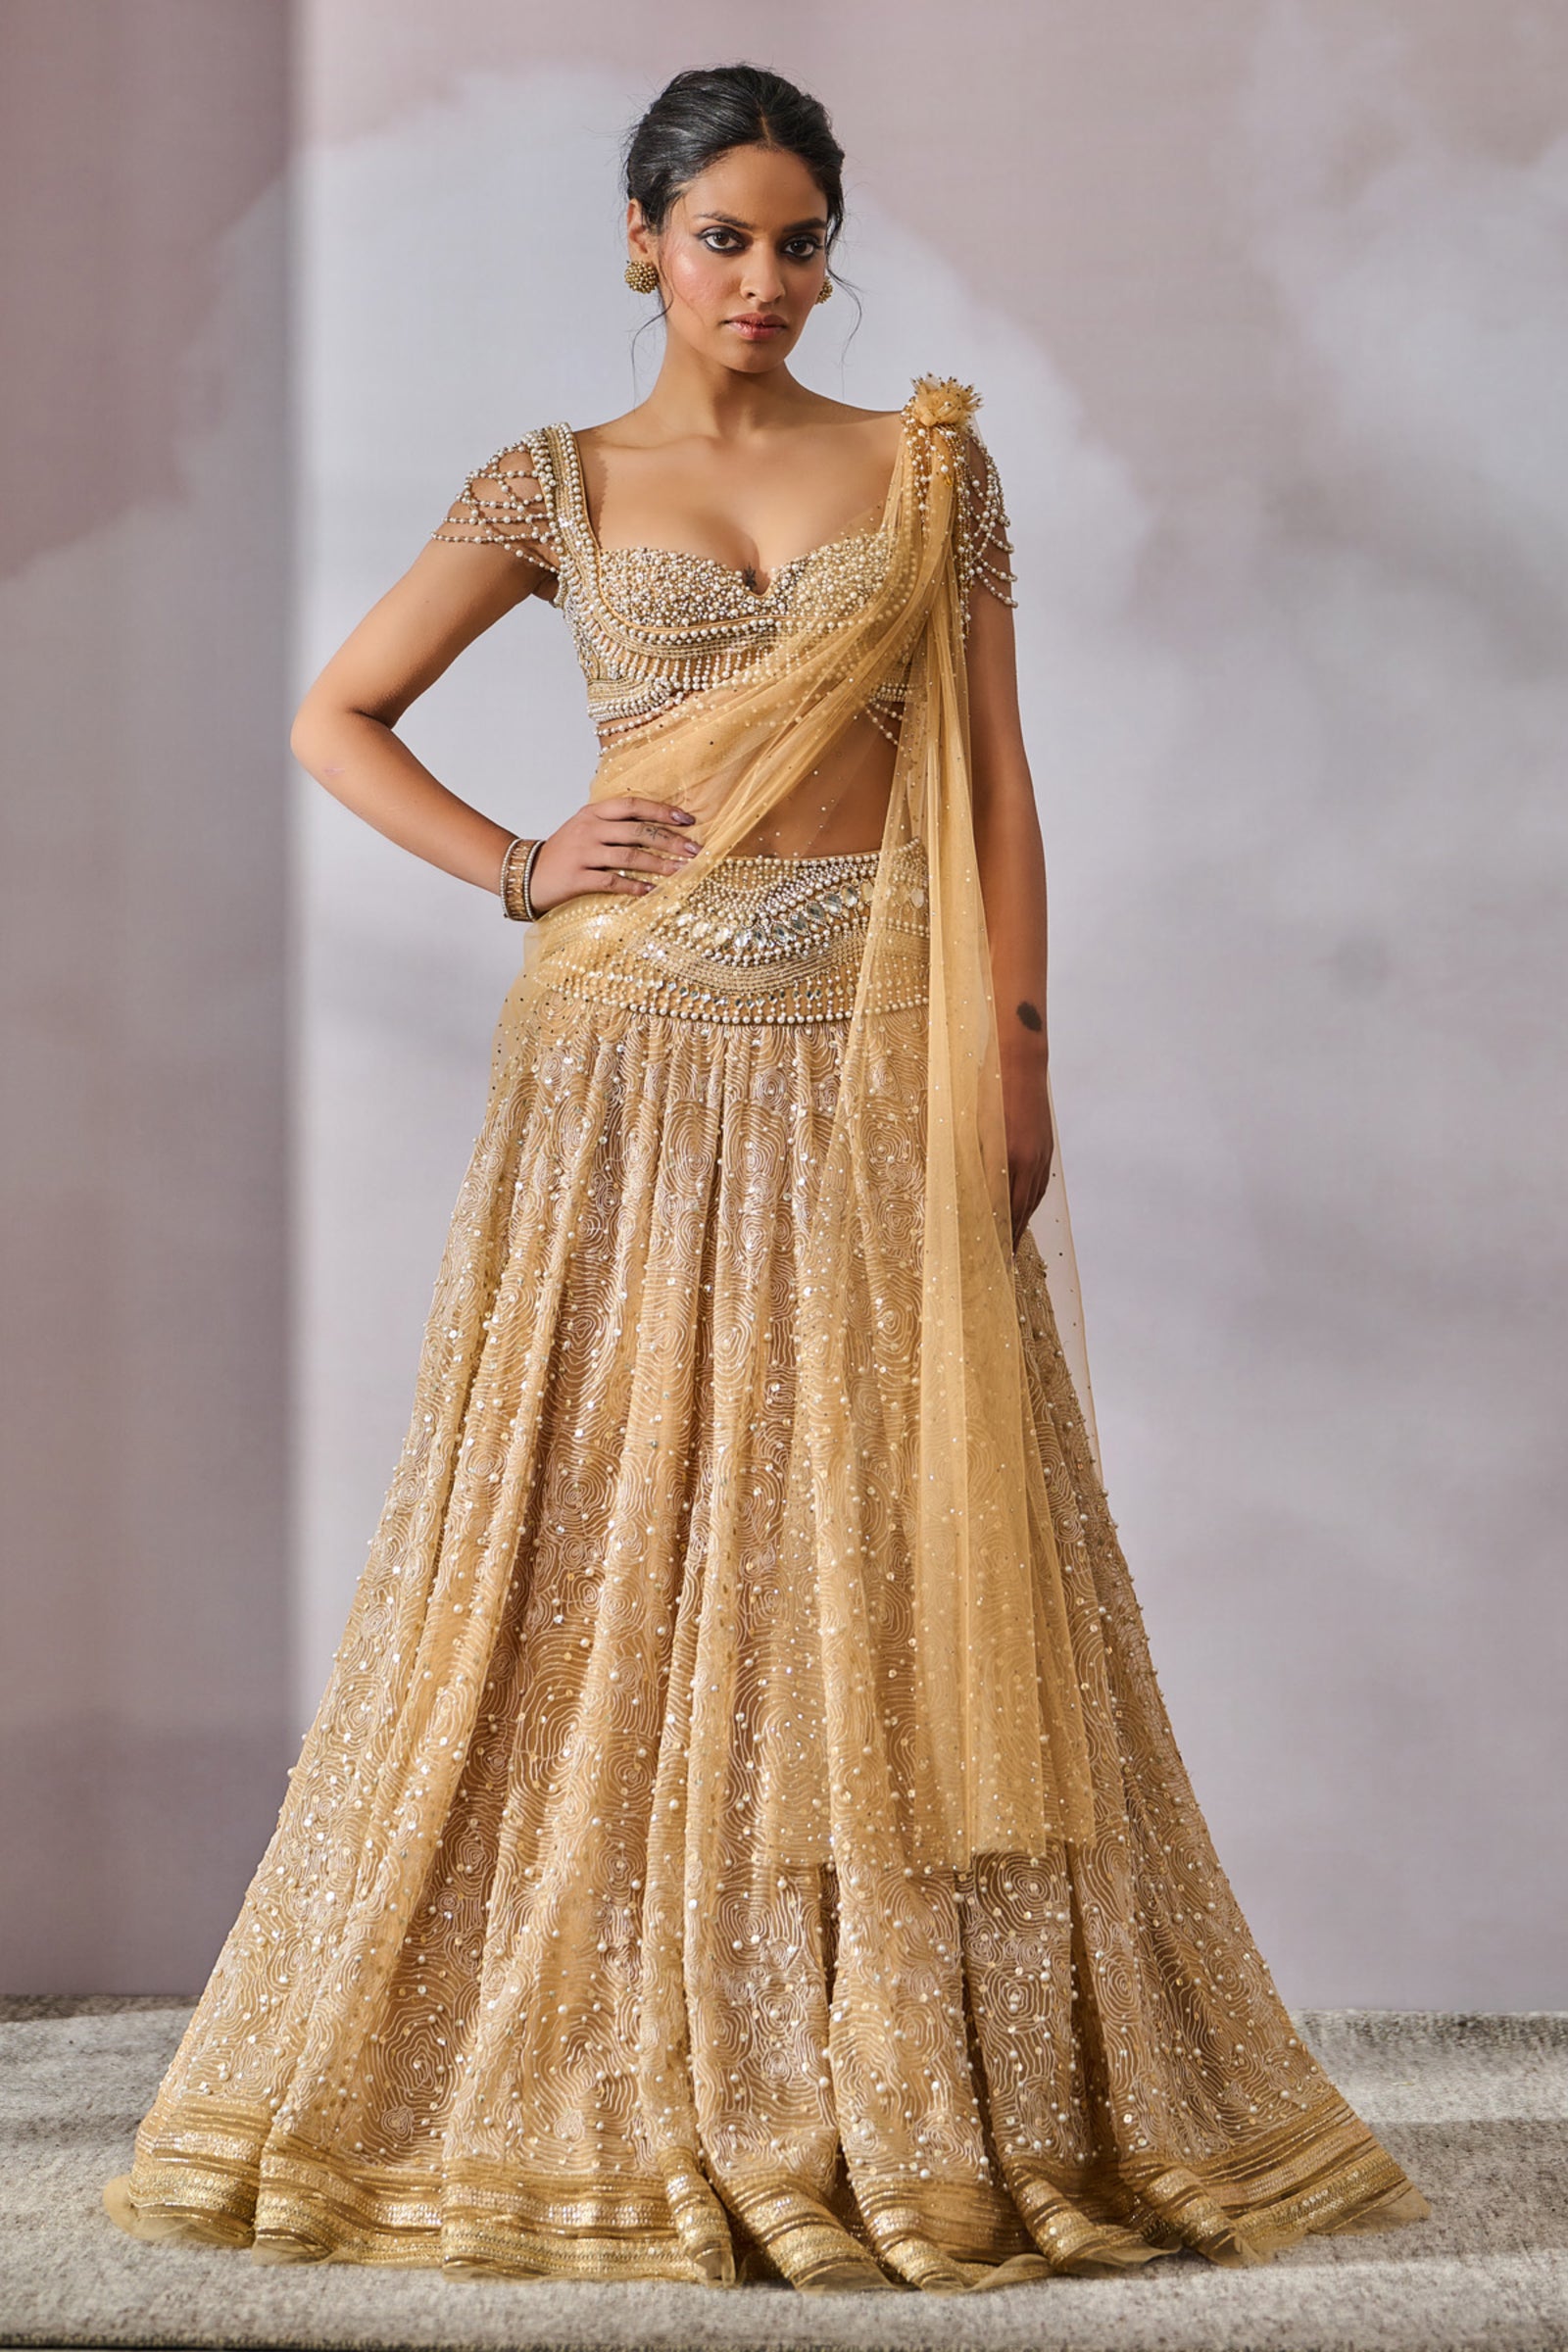 Tarun Tahiliani's Spring Summer Collection Is Perfect For Weddings